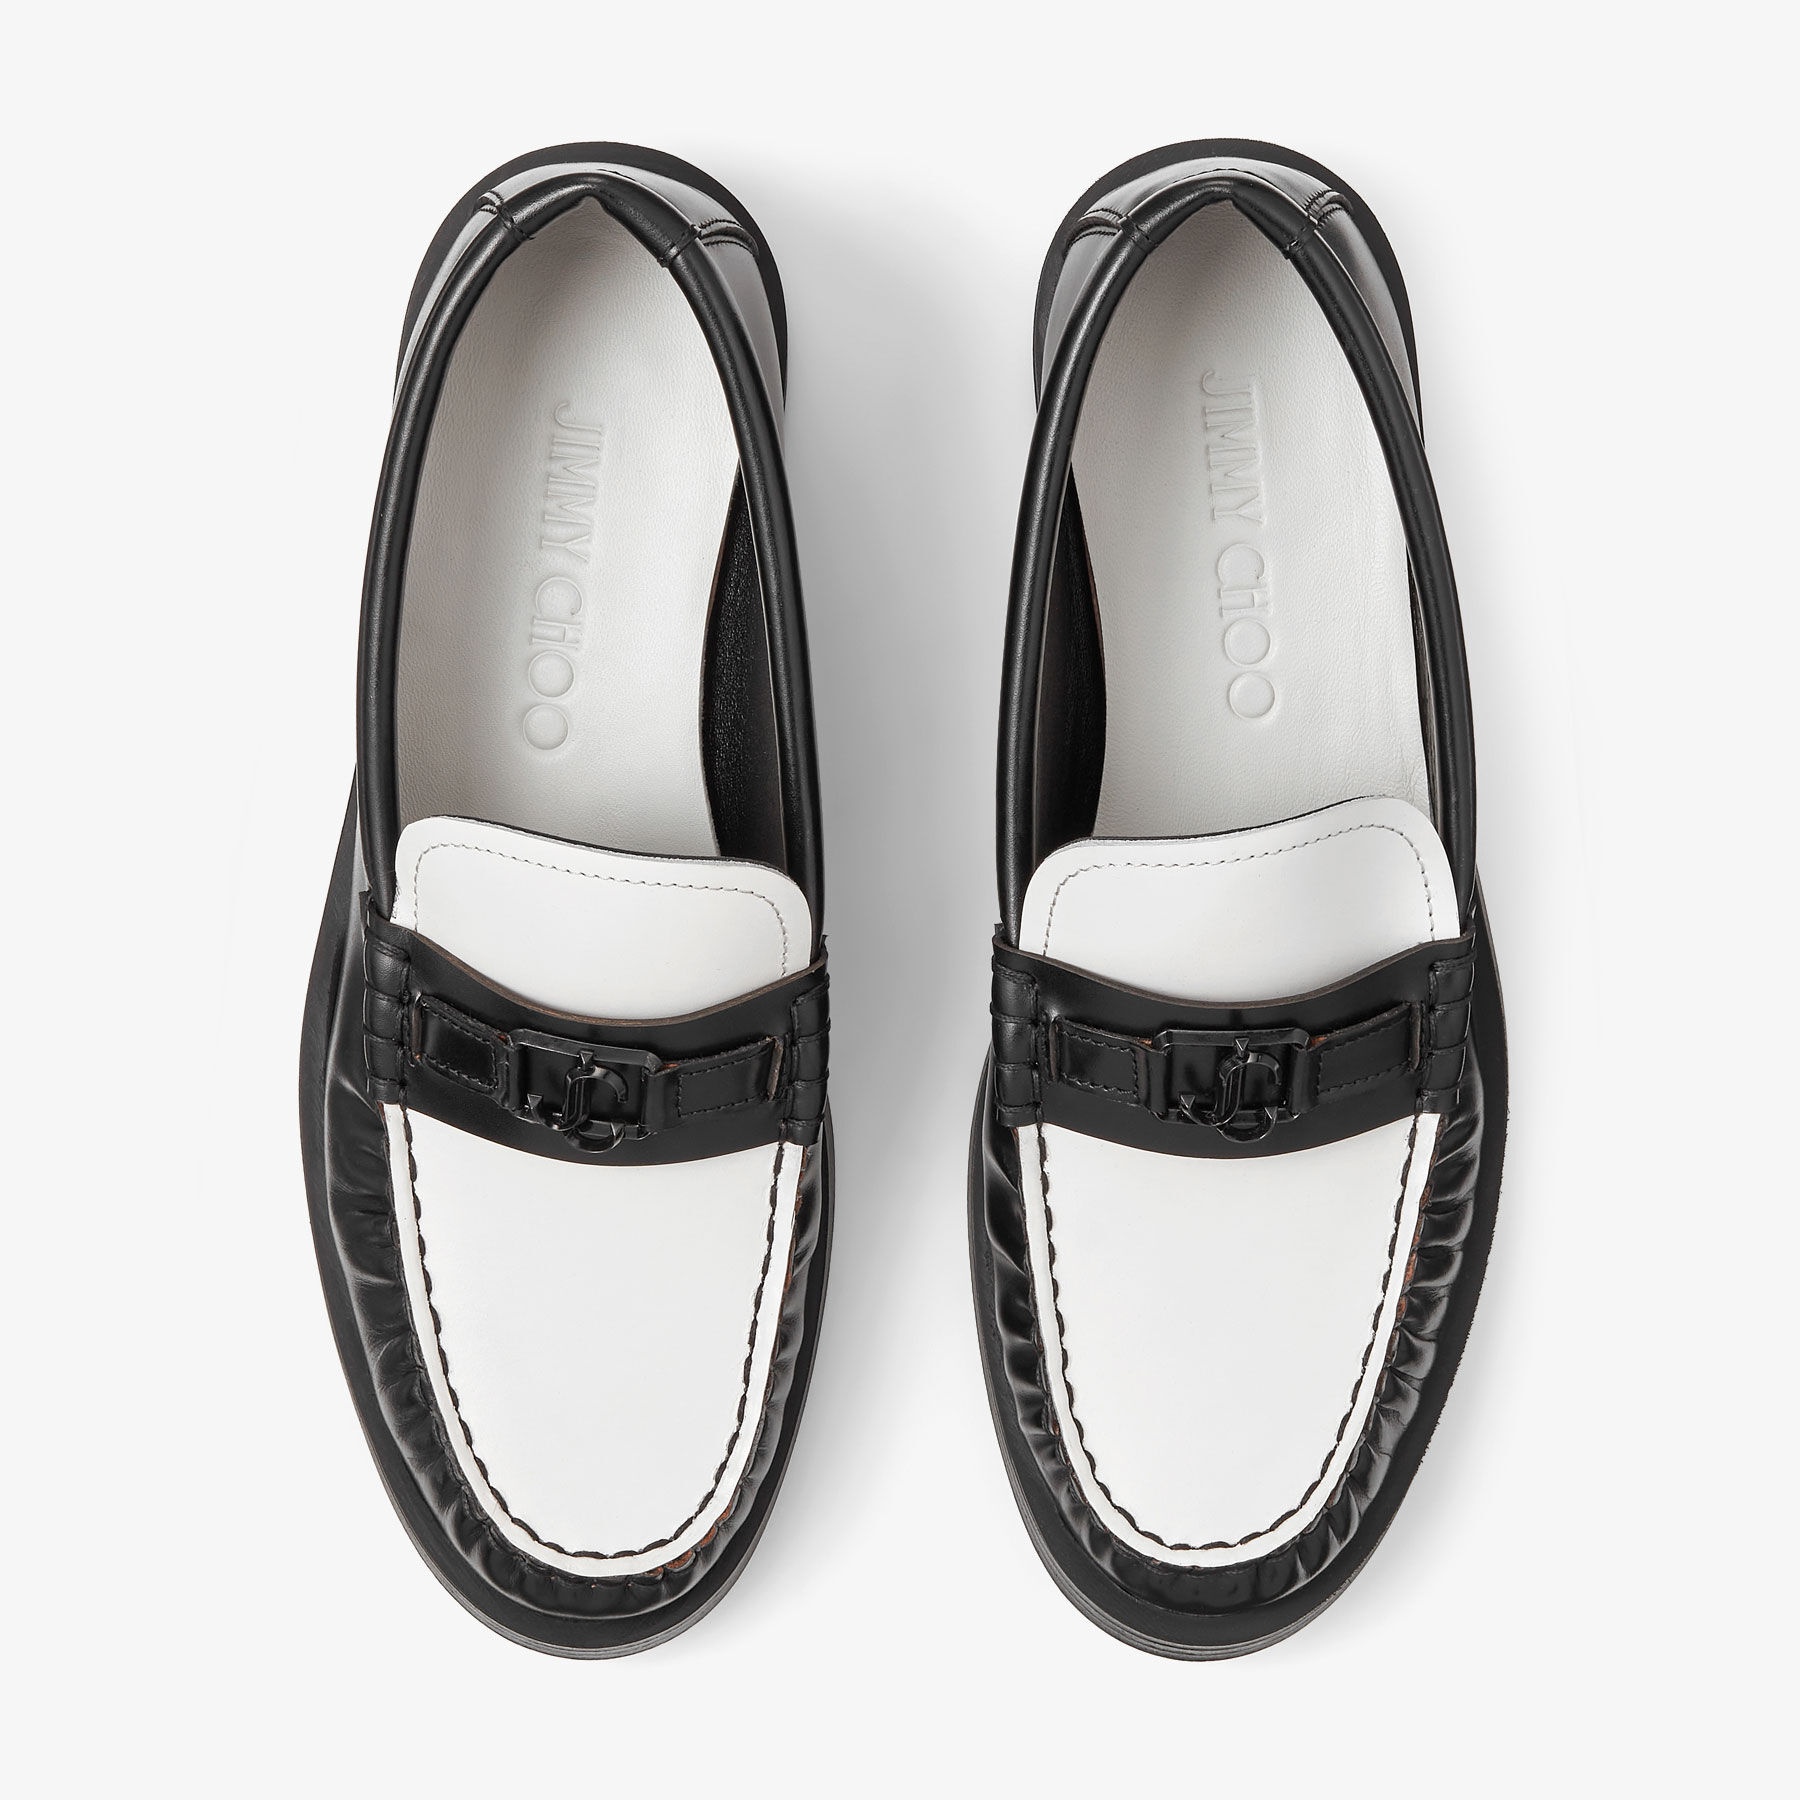 Addie/JC
Black and Latte Box Calf Leather Flat Loafers with JC Emblem - 4